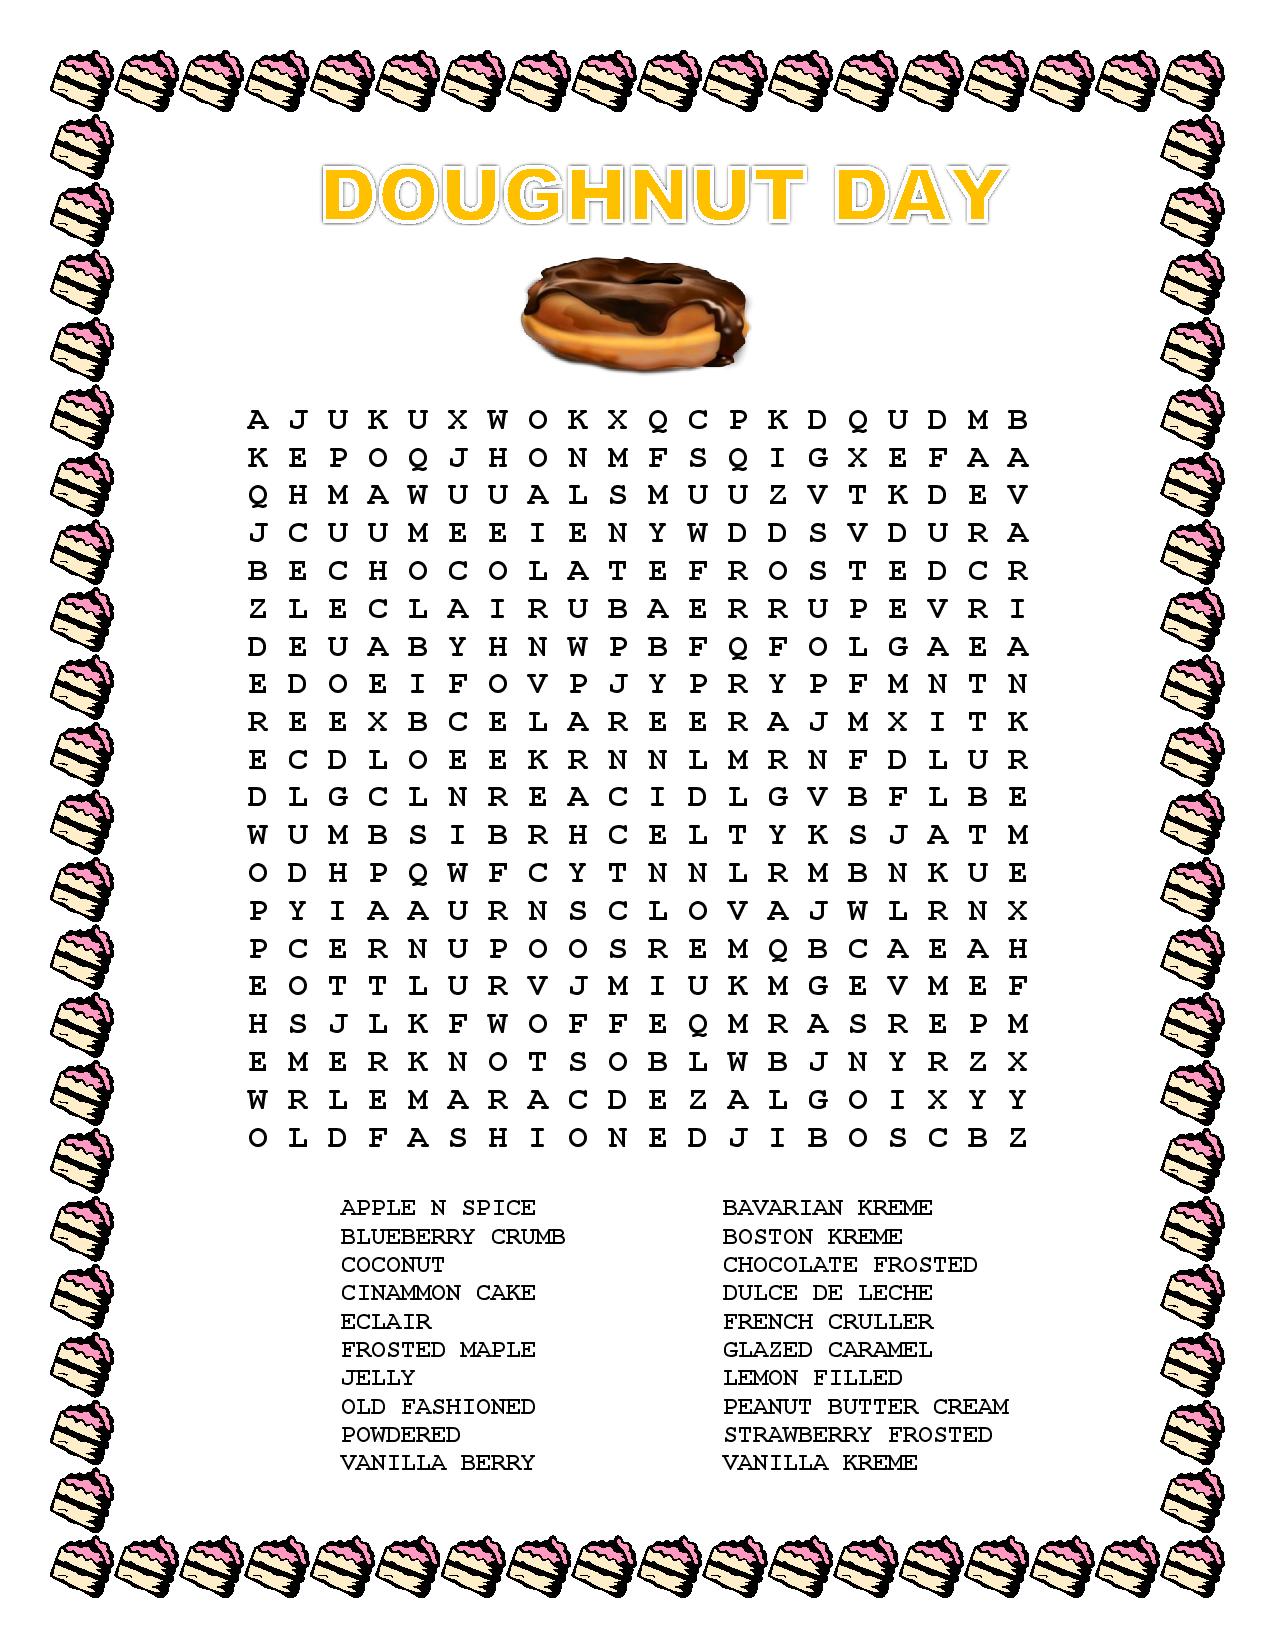 LANGUAGE ARTS LESSONDOUGHNUT DAY JUNE 5WORD SEARCH The Best of